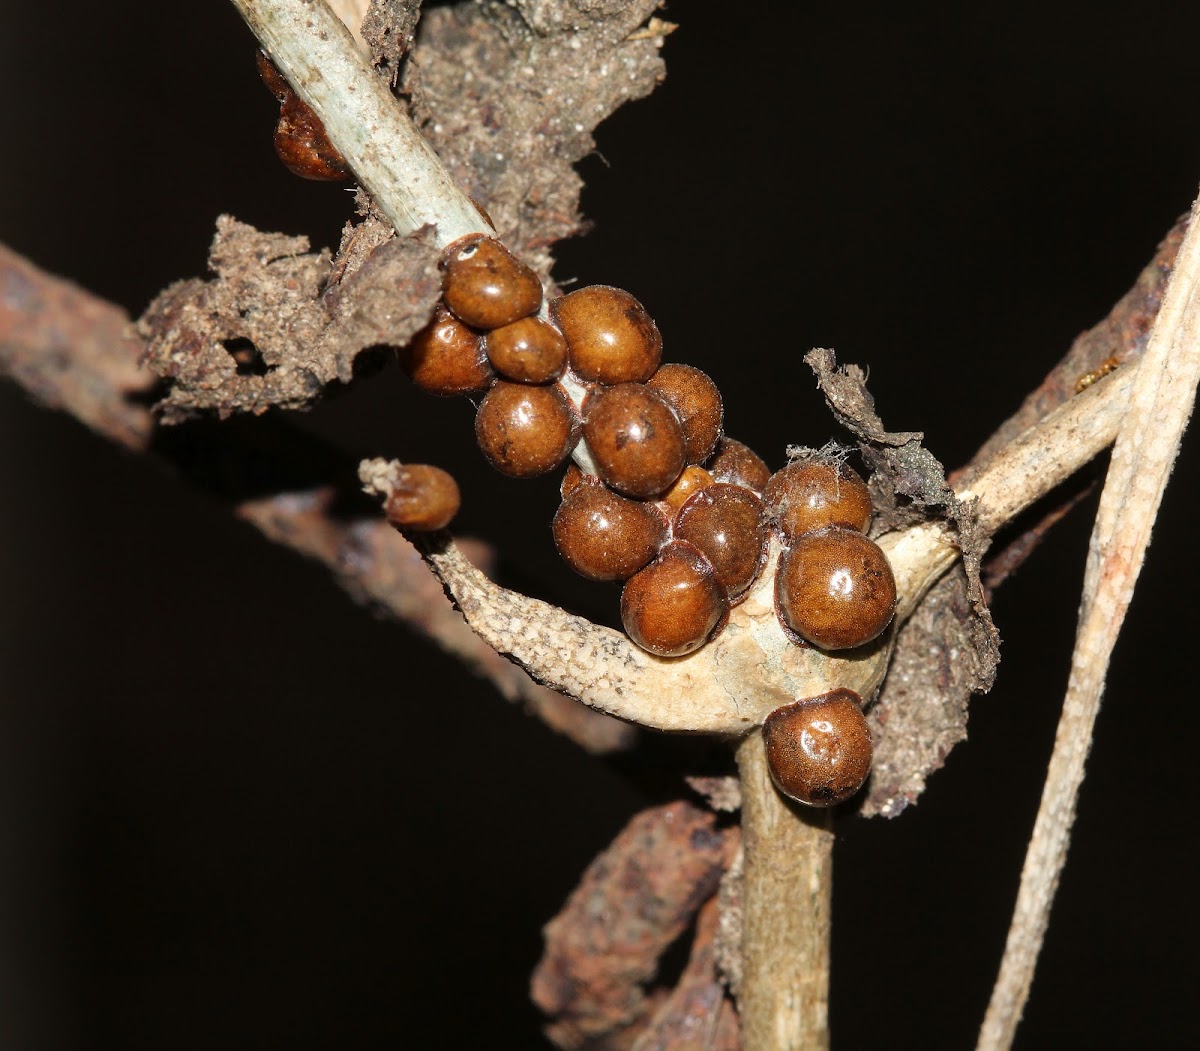 Unknown Nest and Eggs